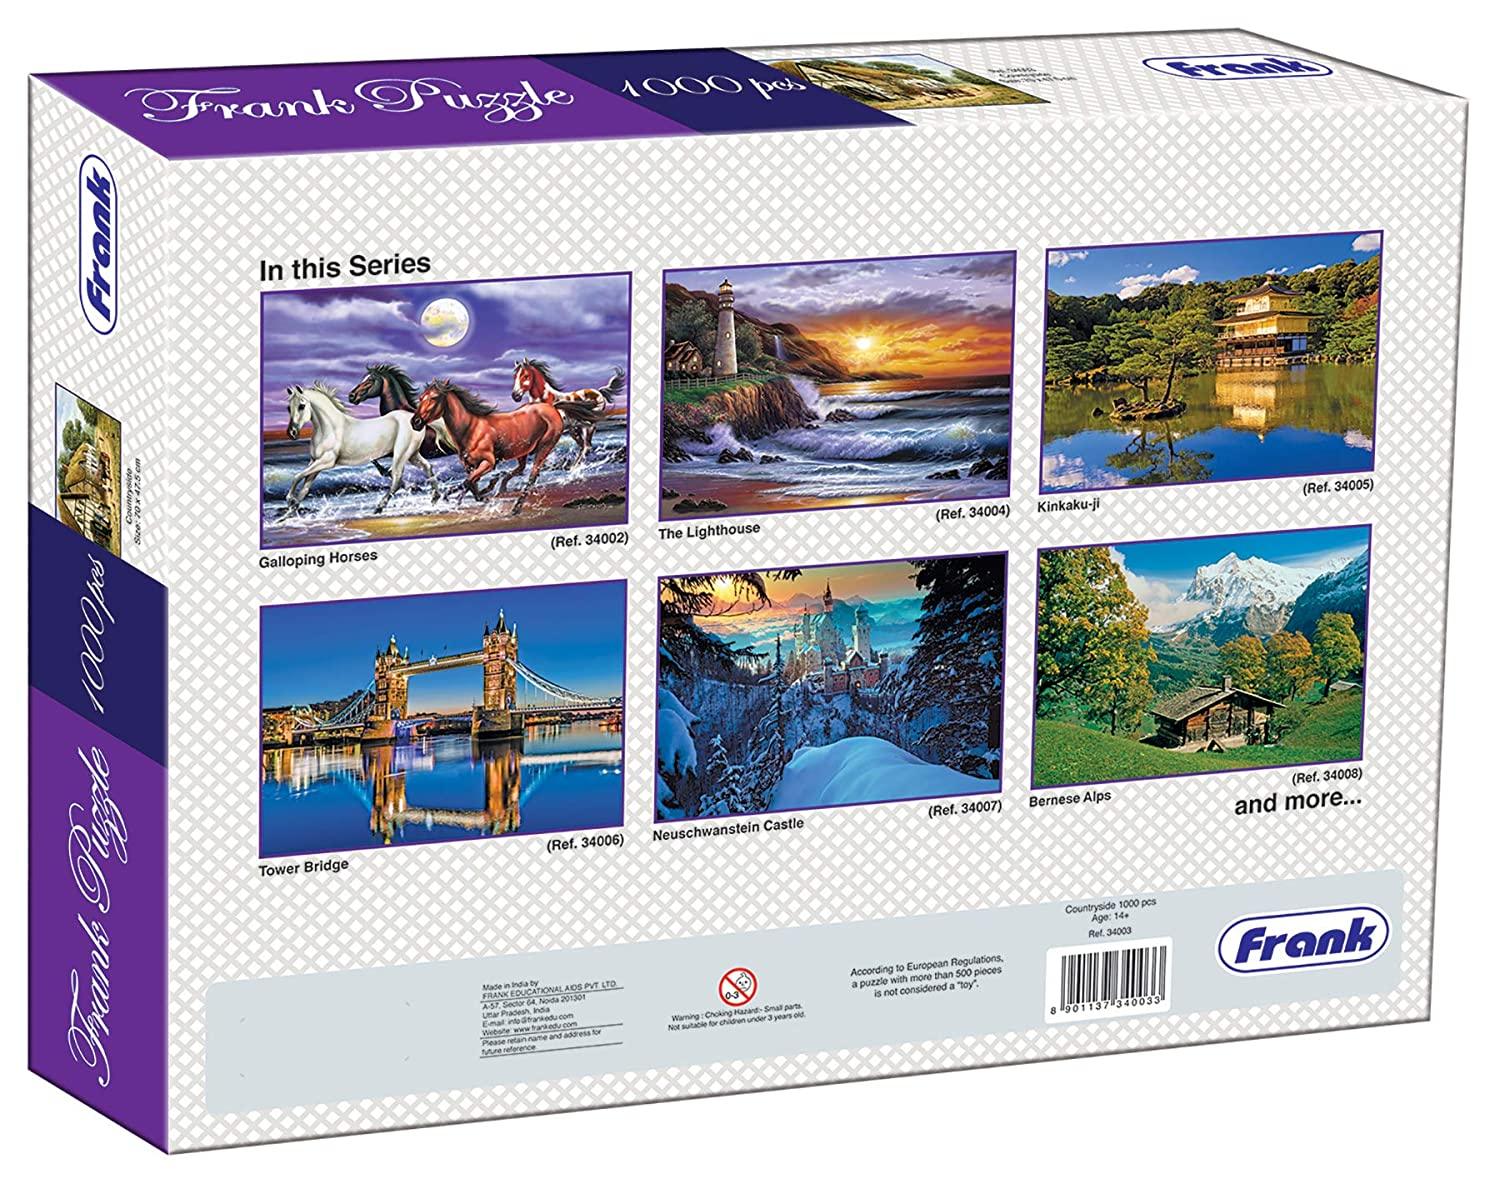 Frank Countryside Puzzle